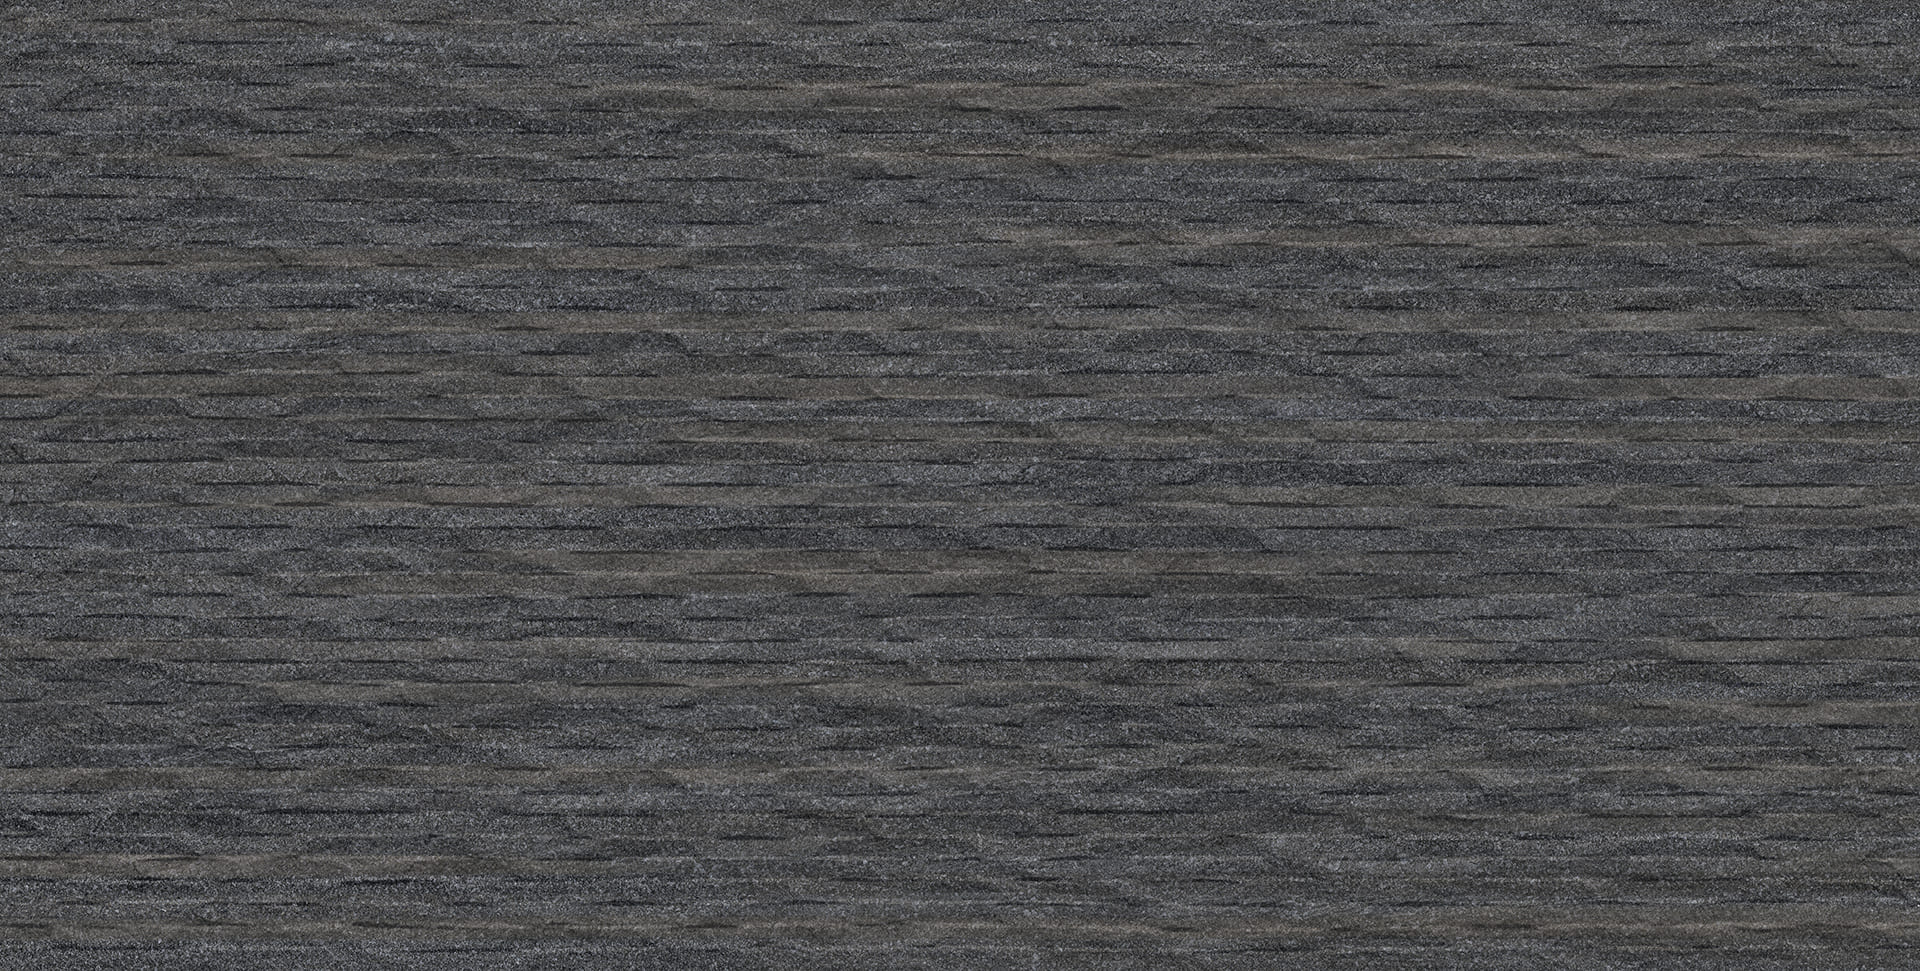 Elegance Pro: Mural Anthracite Wall Tile (24"x48"x9.5-mm | matte)